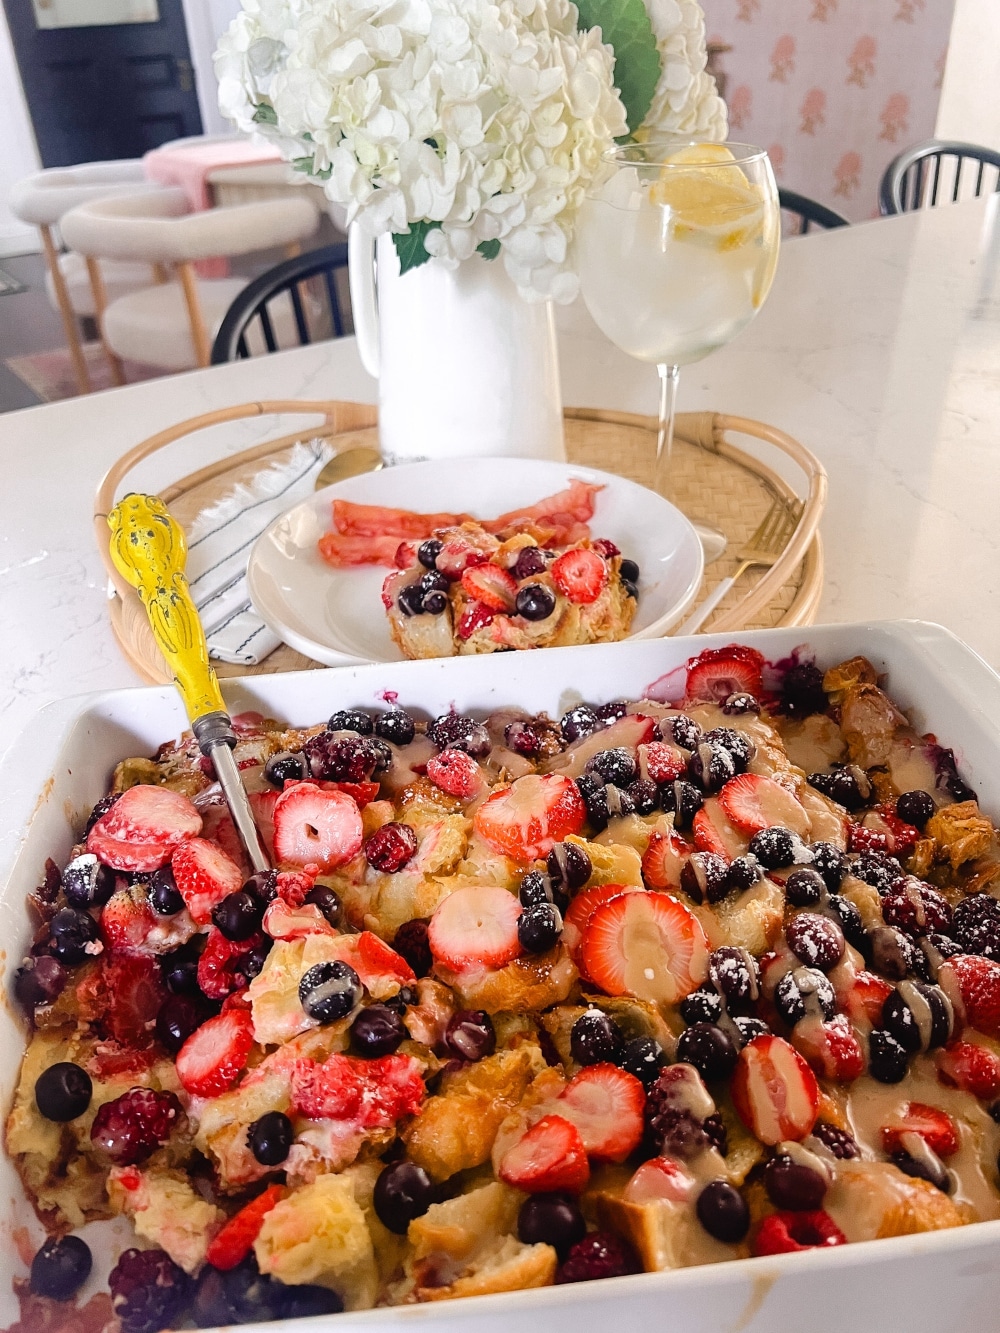 This Berry Croissant Breakfast Casserole combines buttery croissants, a custard filling and berries to create the most delicious breakfast bake. Prepare it the night before and just pop it in the oven for an easy overnight breakfast dish perfect for ANY occasion!